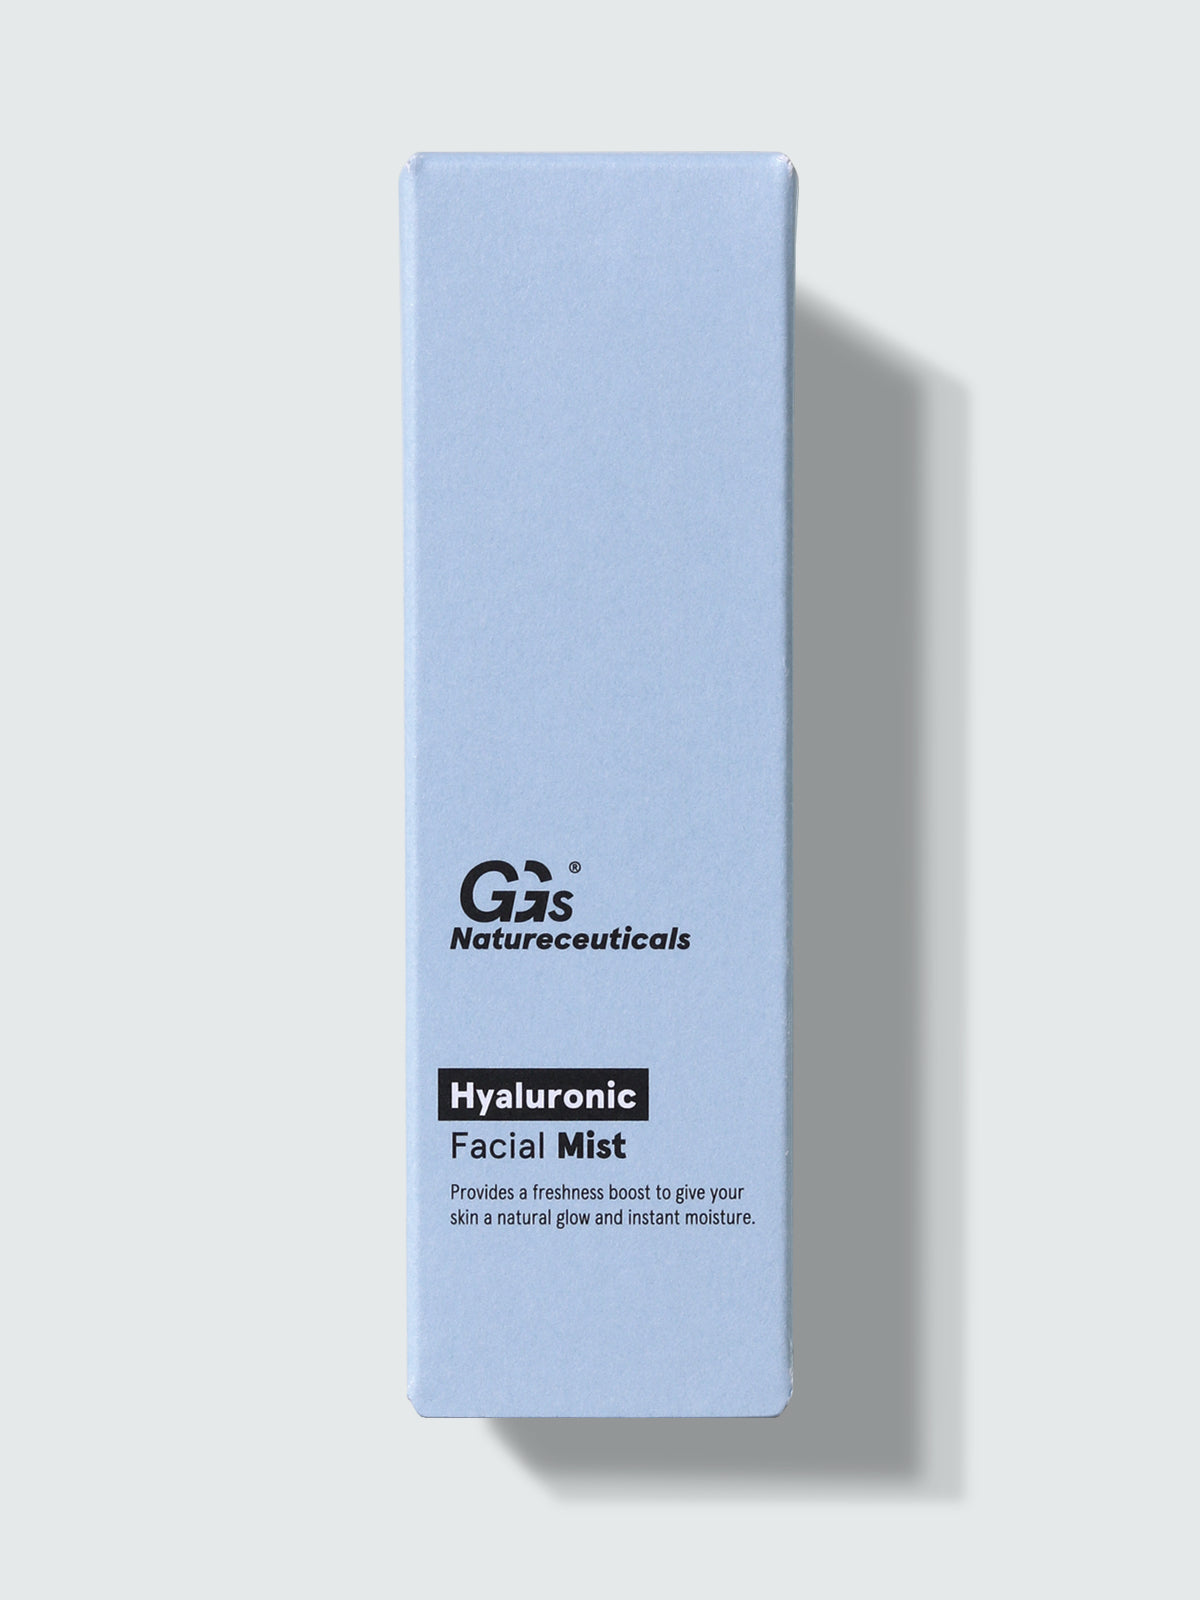 Hyaluronic Facial Mist | GGs Natureceuticals